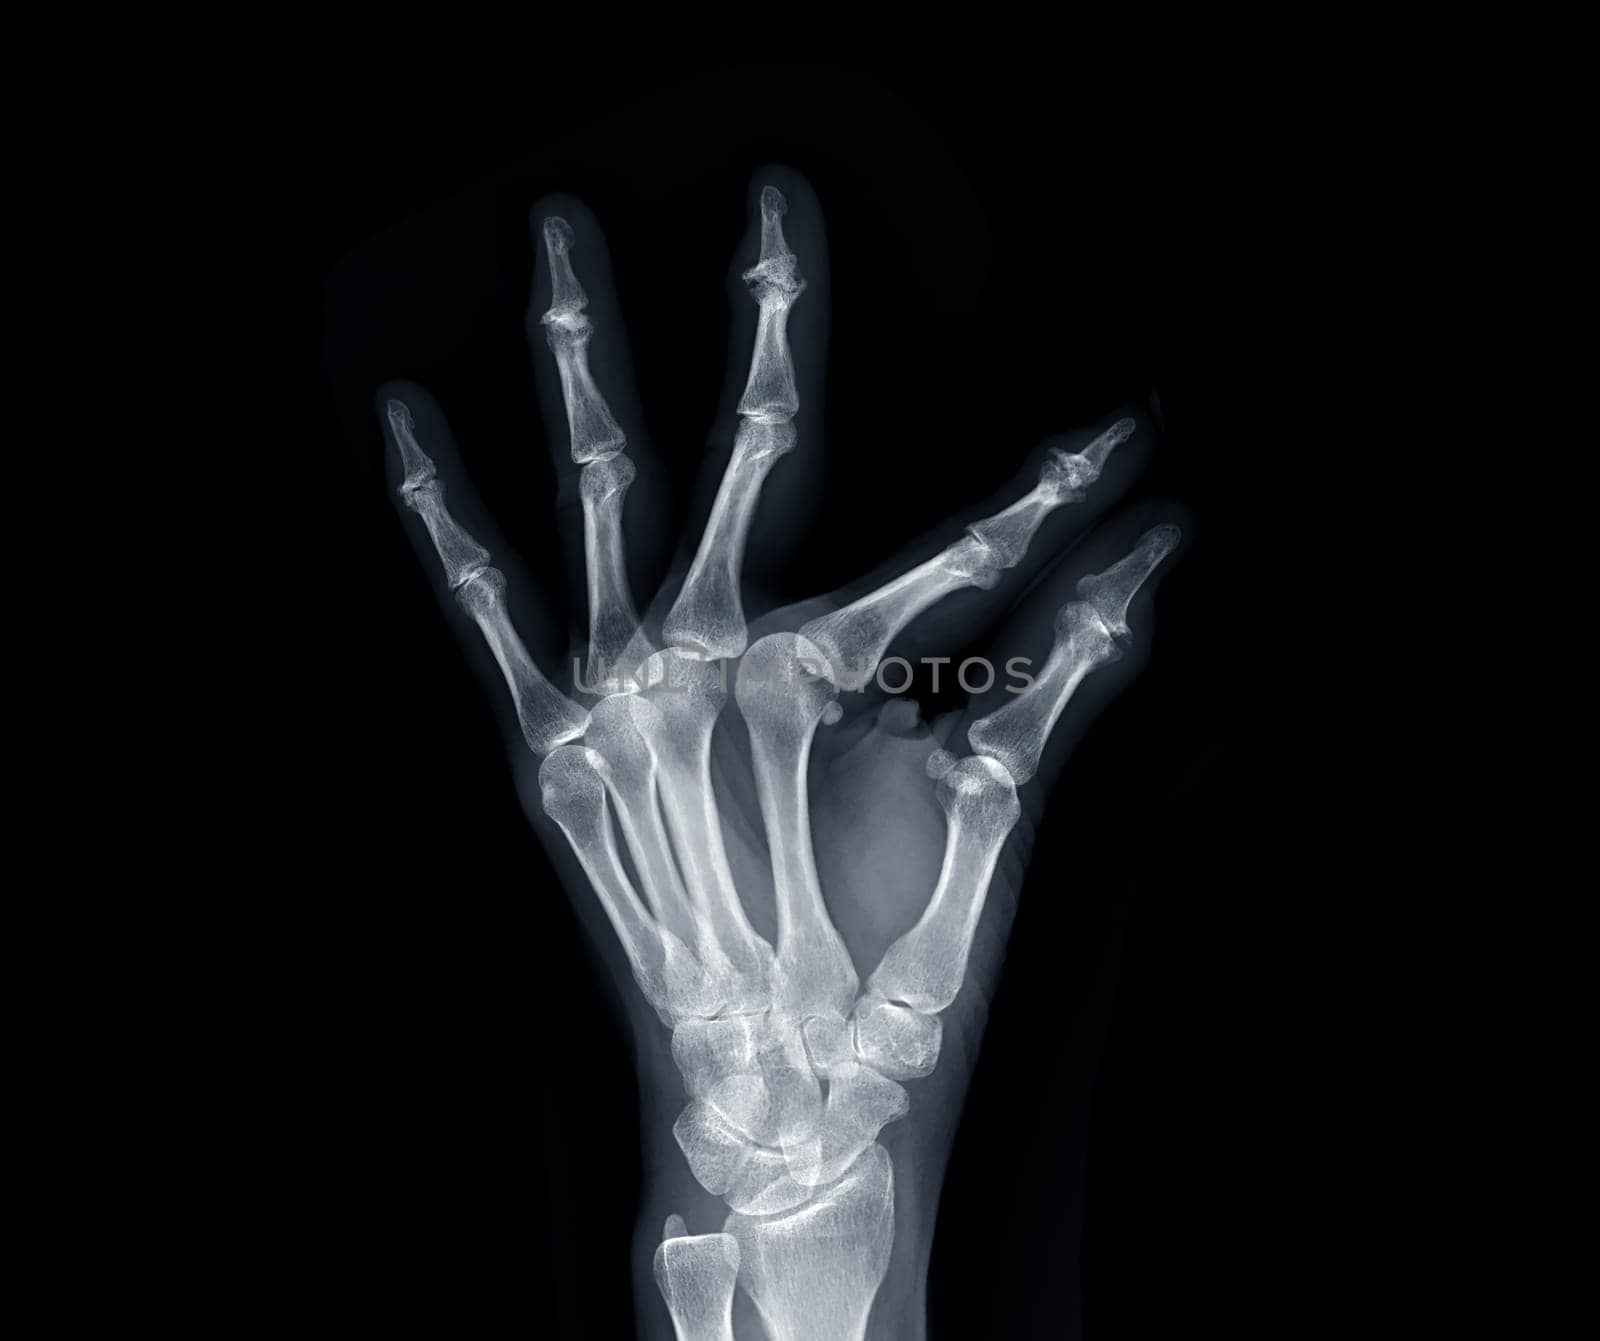 Film x-ray both hand AP view show human's hands isolated on black background .